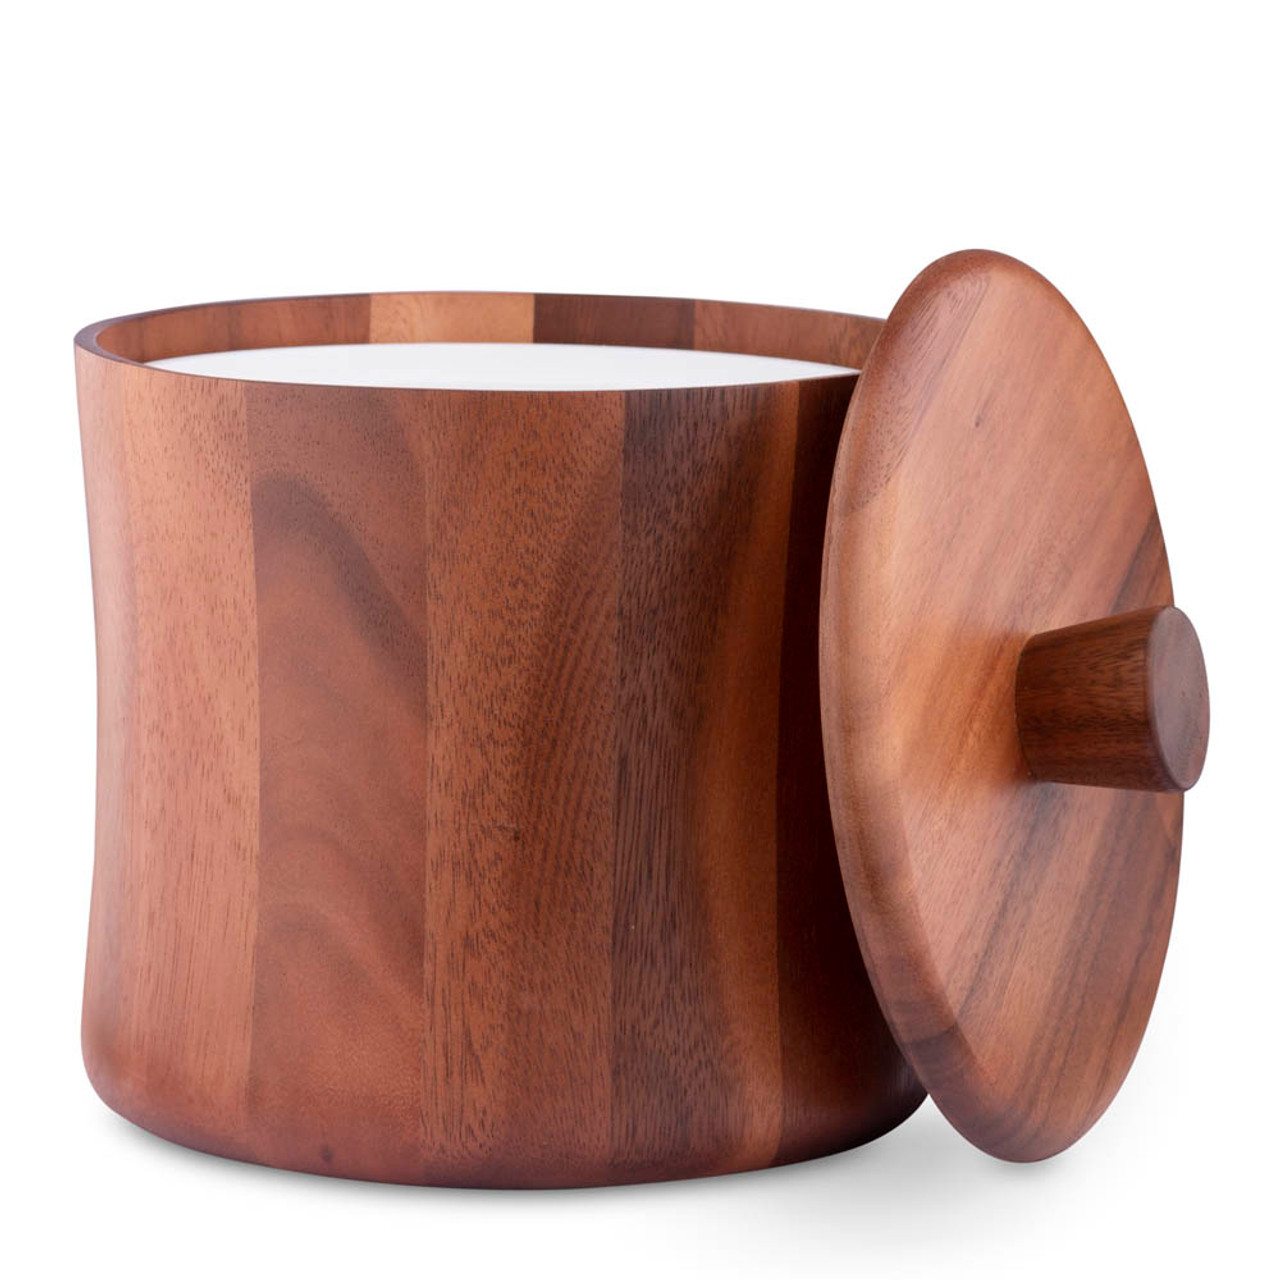 wooden ice bucket with lid